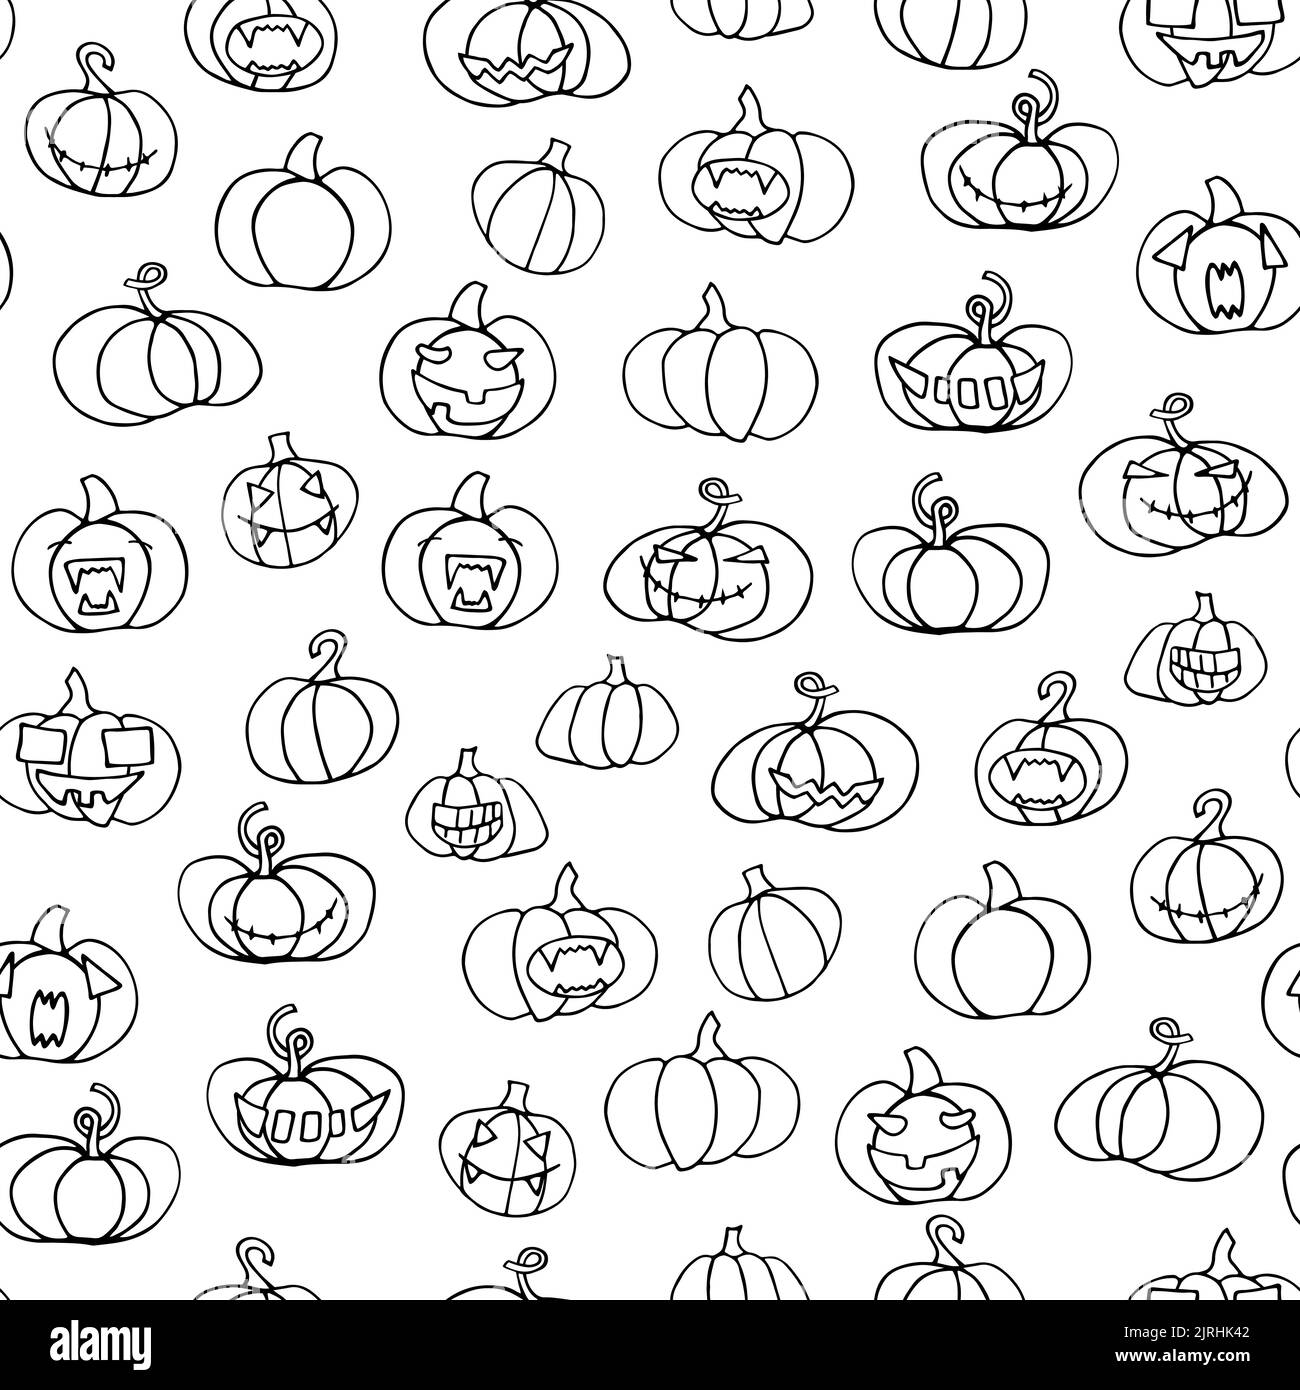 Scary pumpkins black and white stock photos images